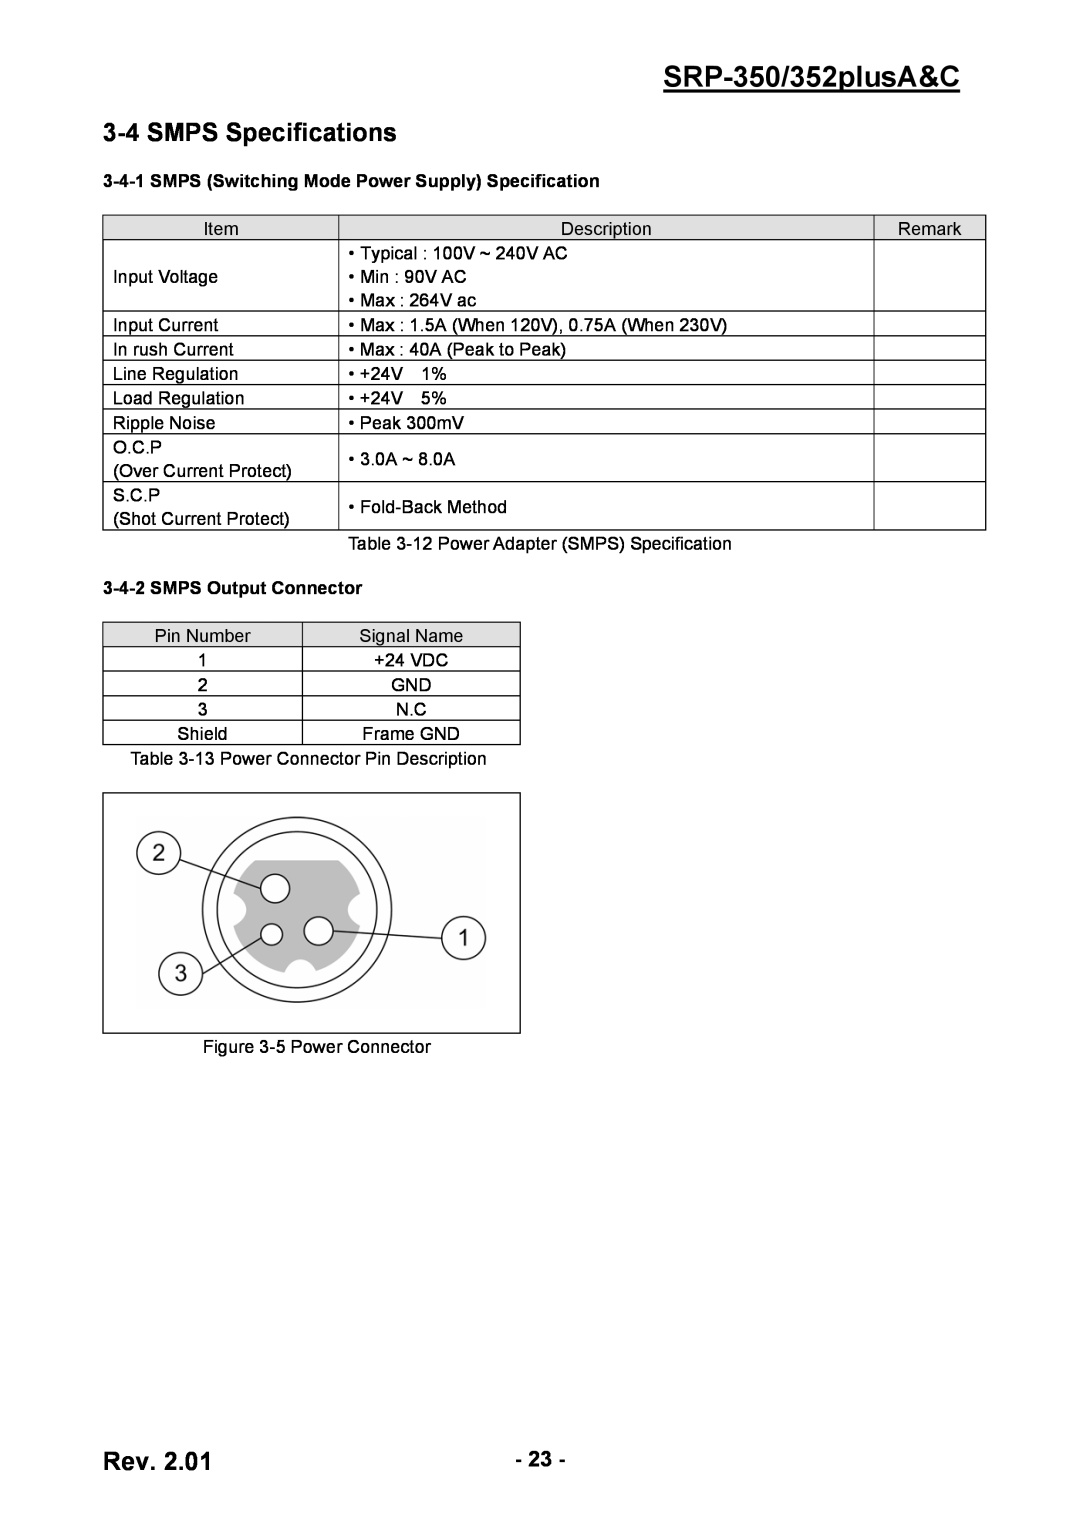 BIXOLON SMPS Specifications, SRP-350/352plusA&C, SMPS Switching Mode Power Supply Specification, SMPS Output Connector 